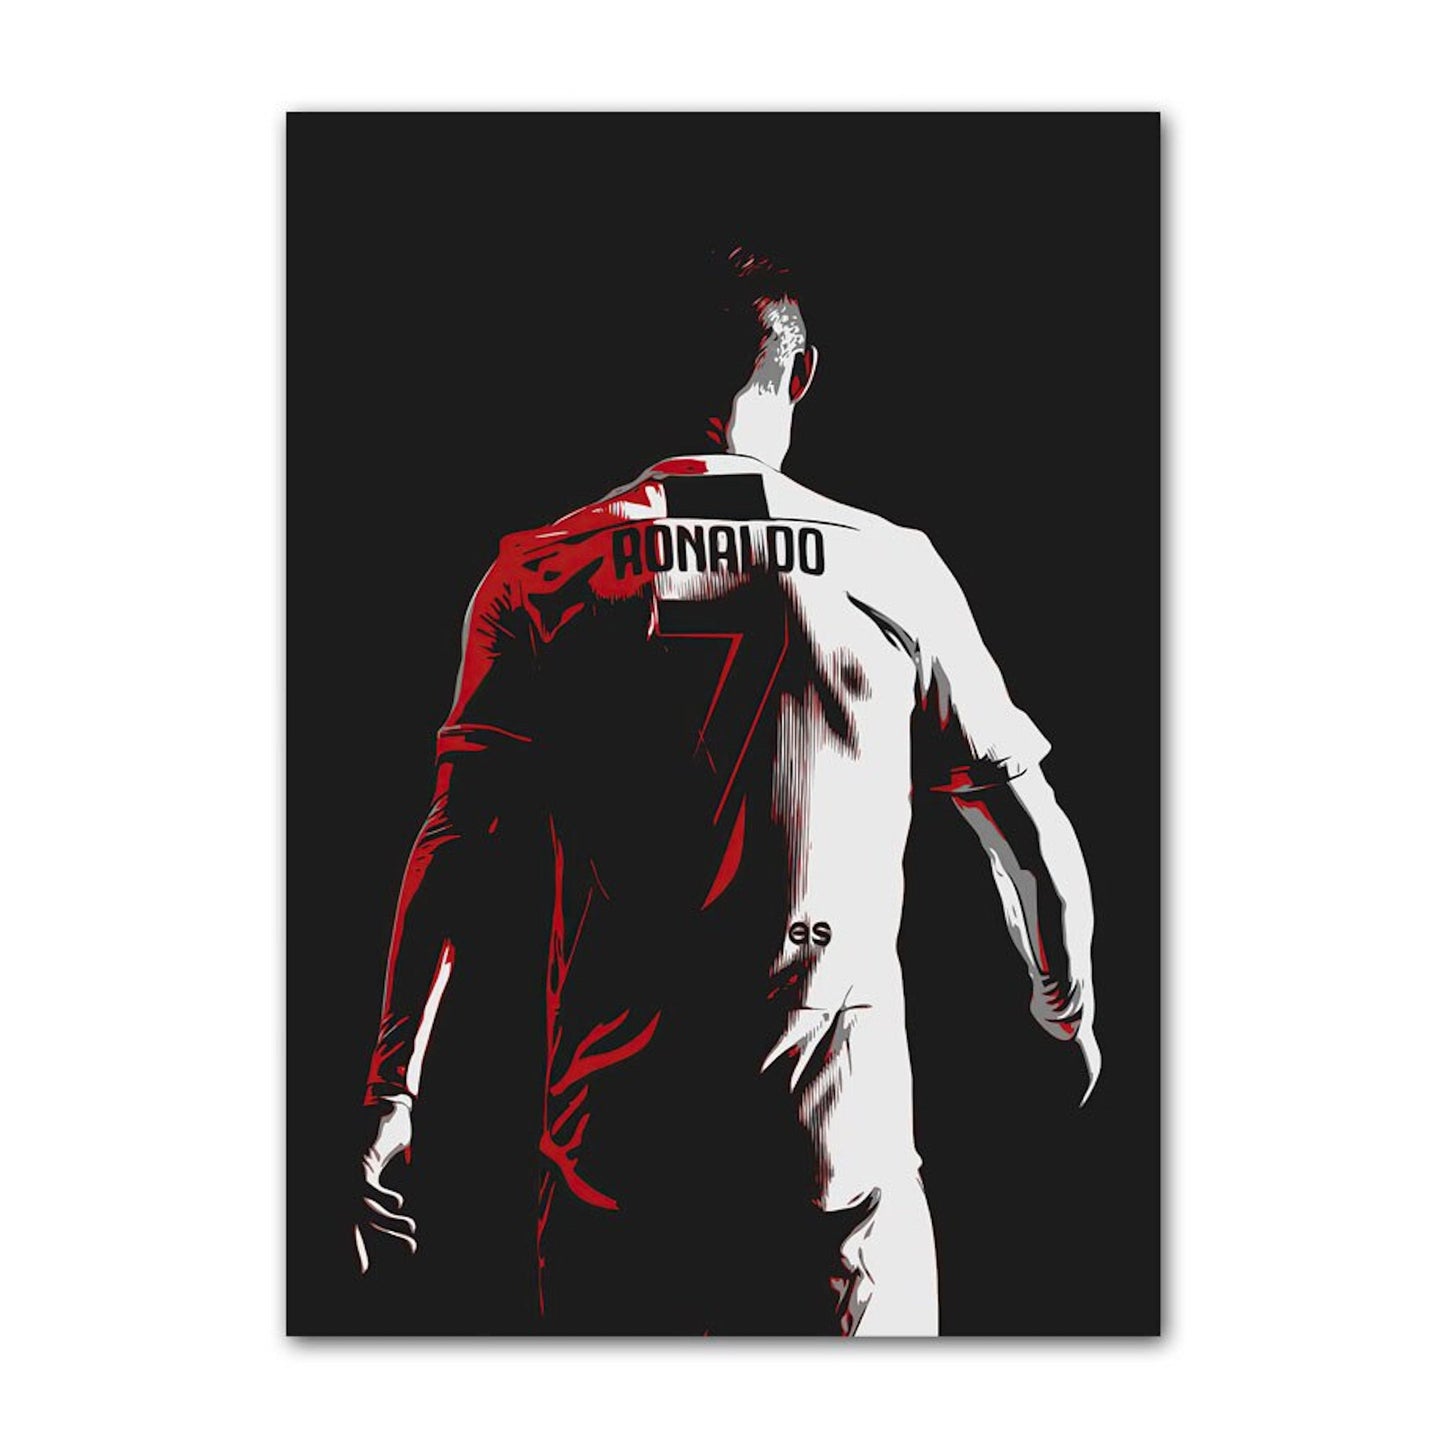 Poster football Christiano Ronaldo jubilation with trophy as decorative print without frame